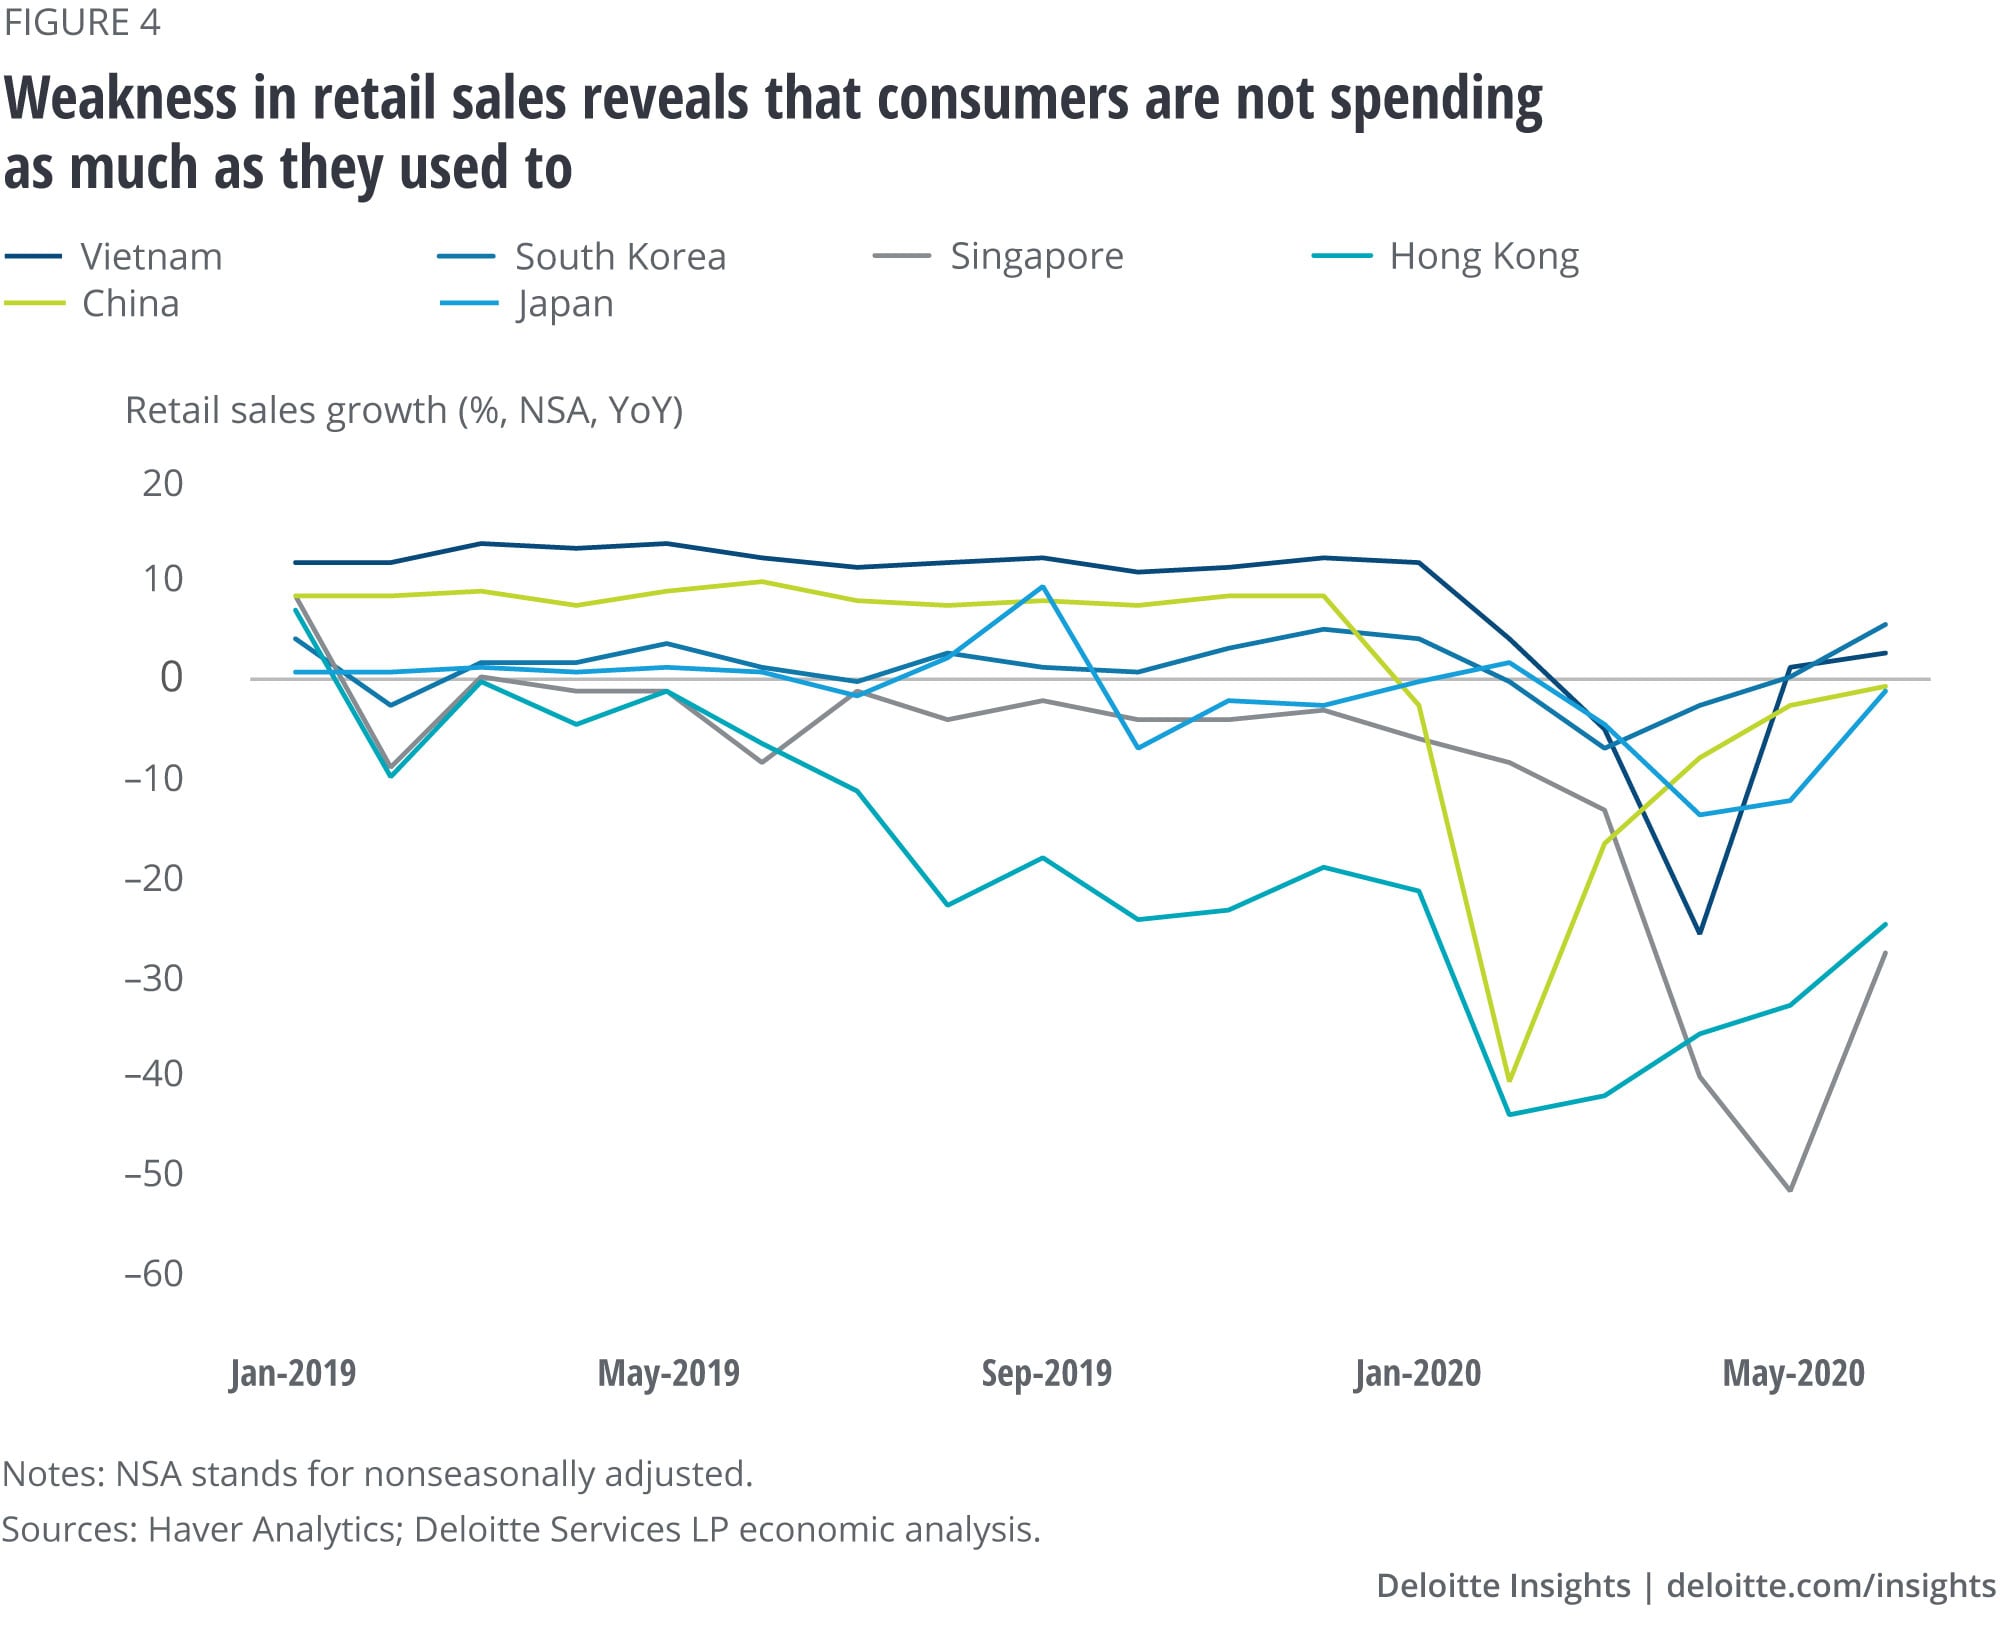 Weakness in retail sales reveal how consumers are not spending as much as they used to